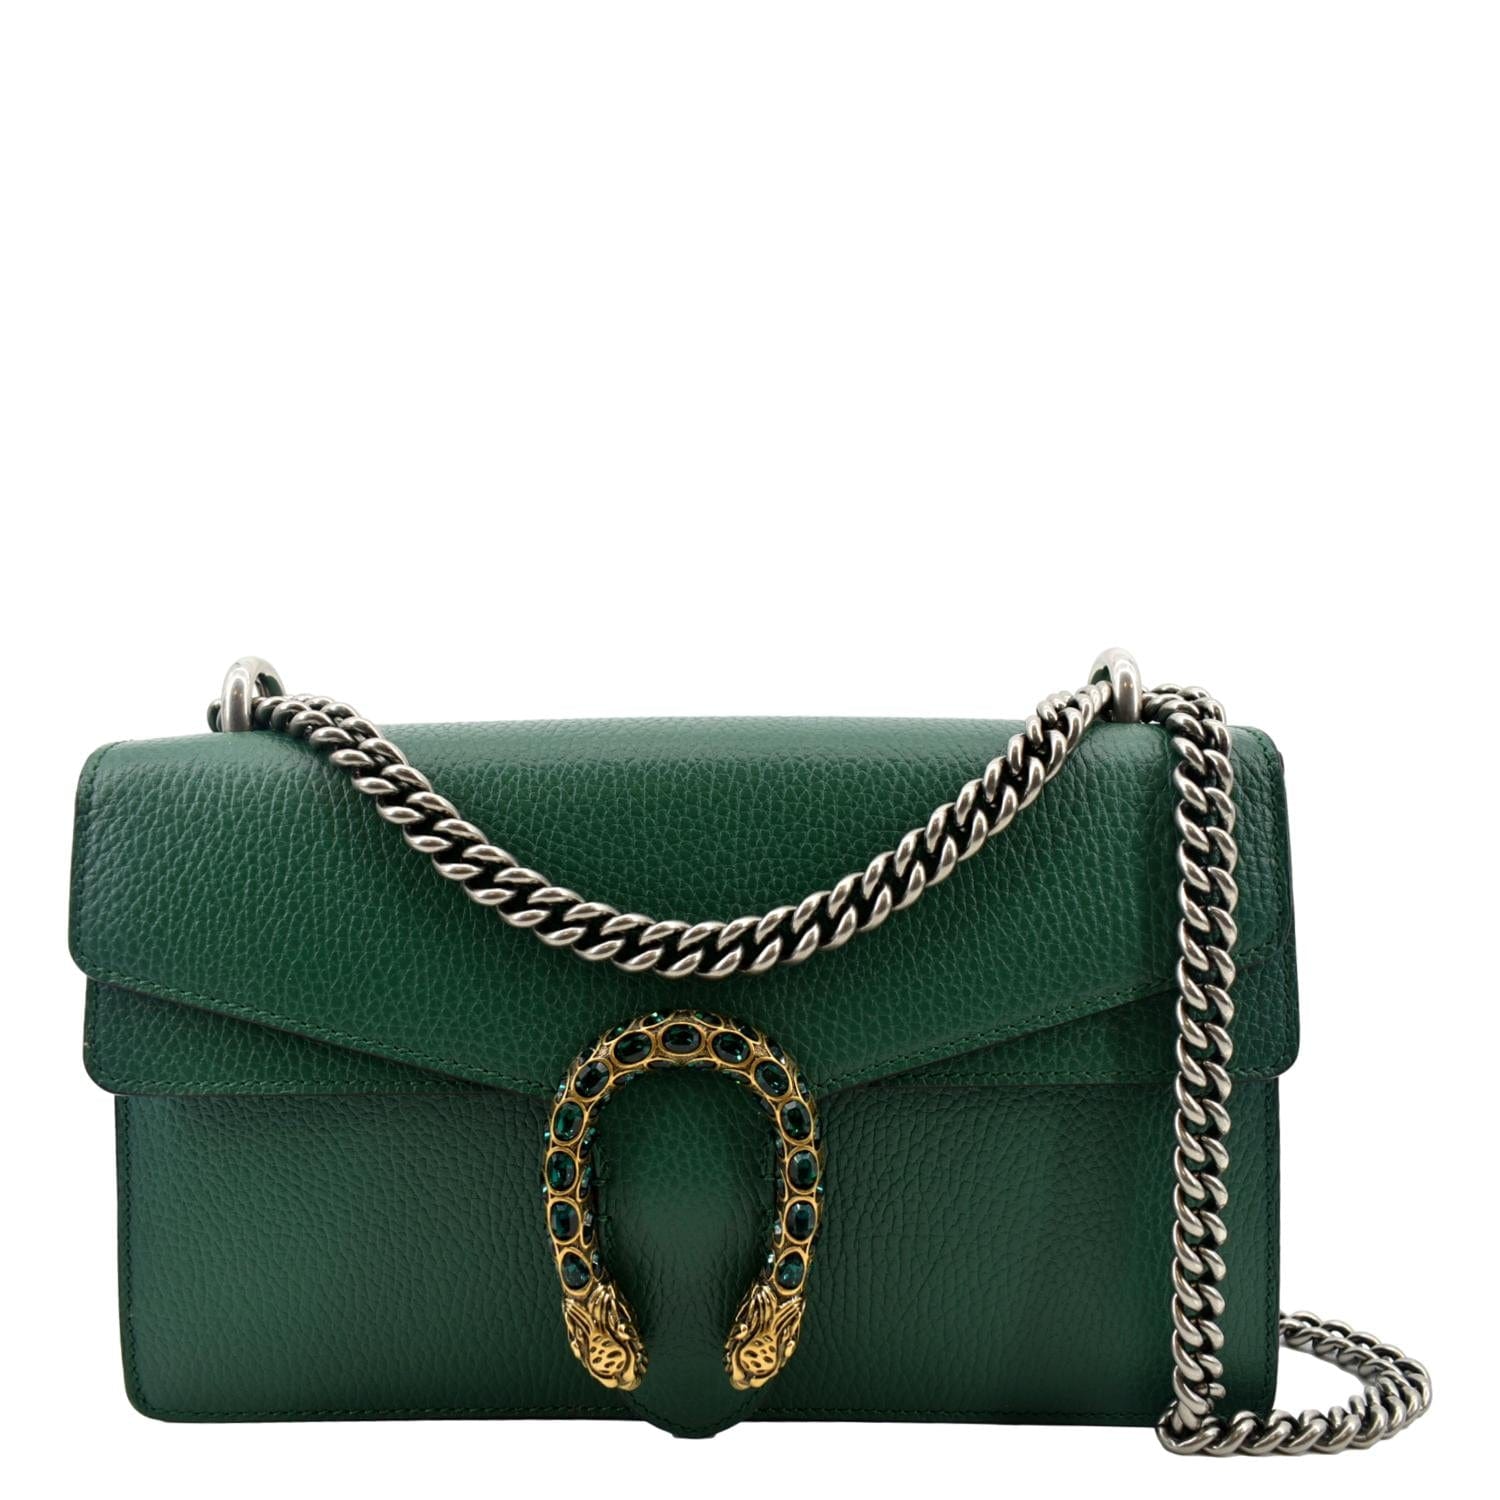 Gucci Dionysus Small Leather Shoulder Bag